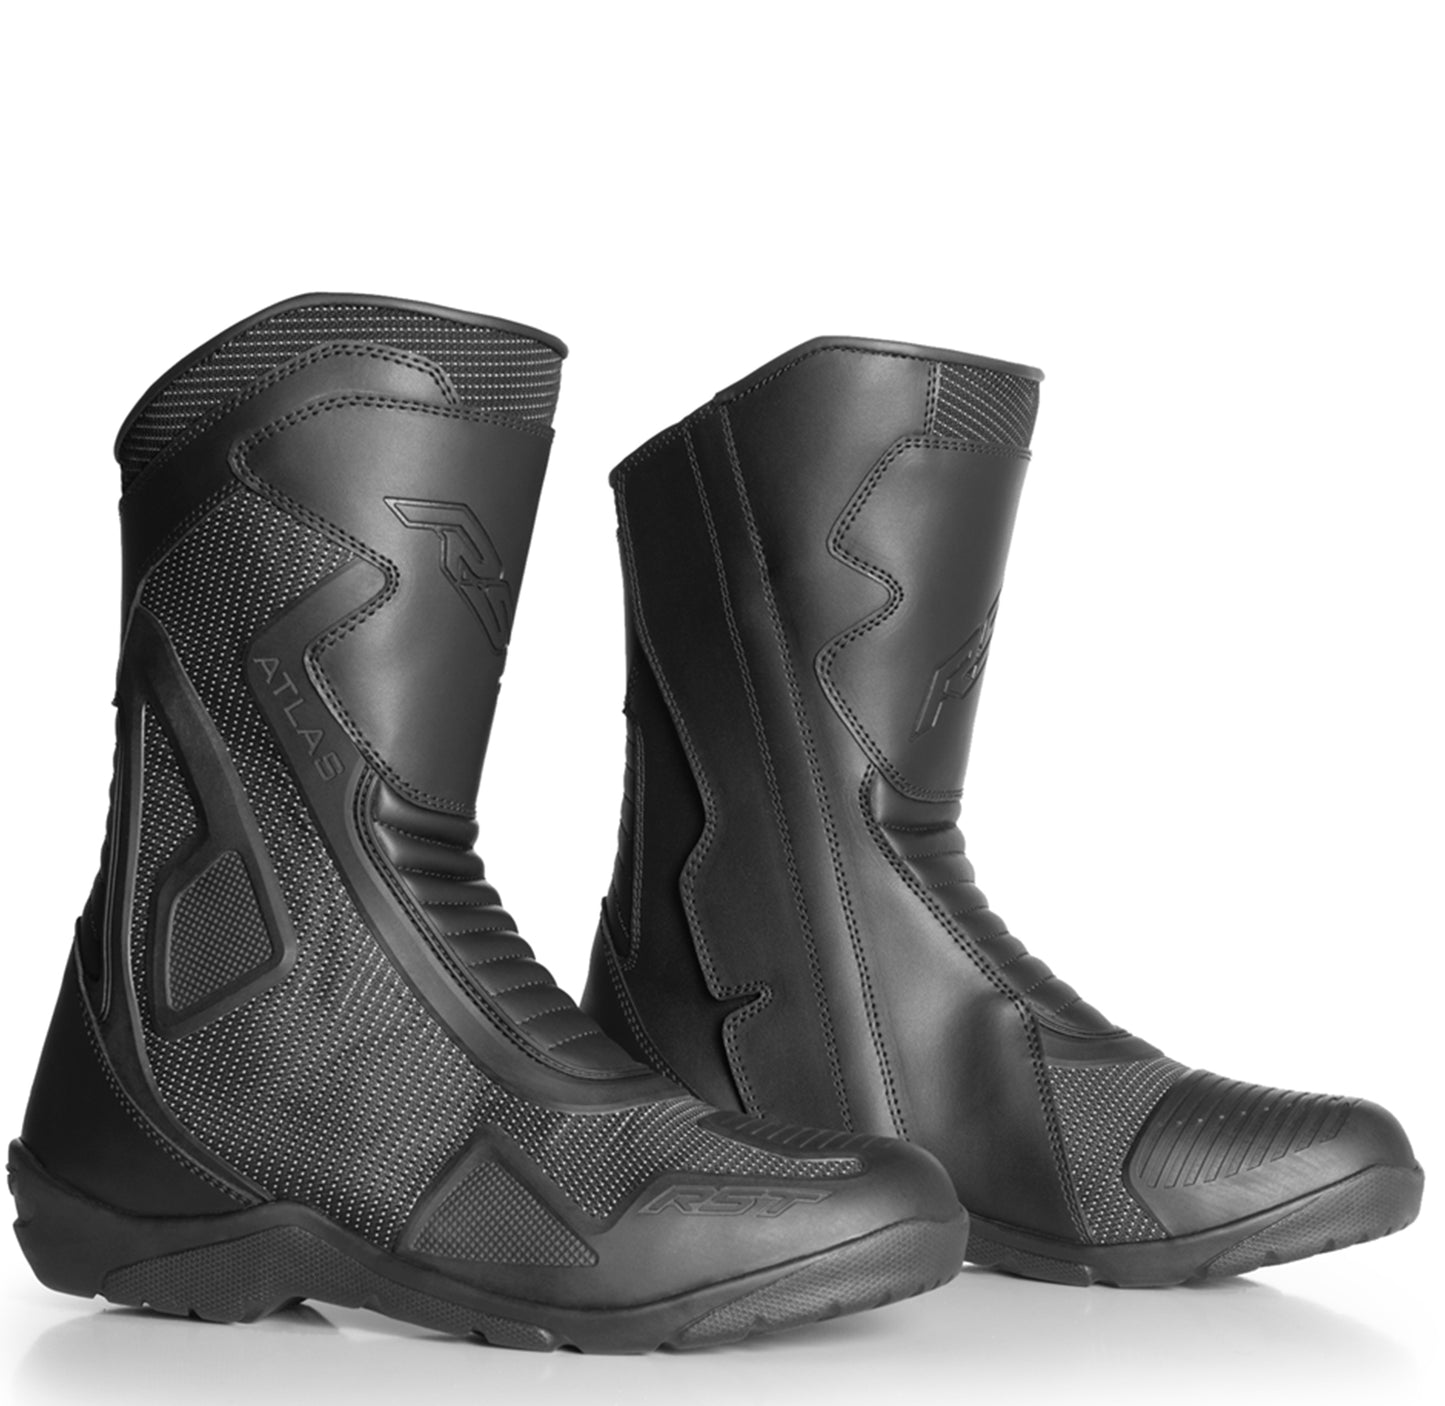 RST Atlas WaterProof Riding Boots - CE APPROVED - Black